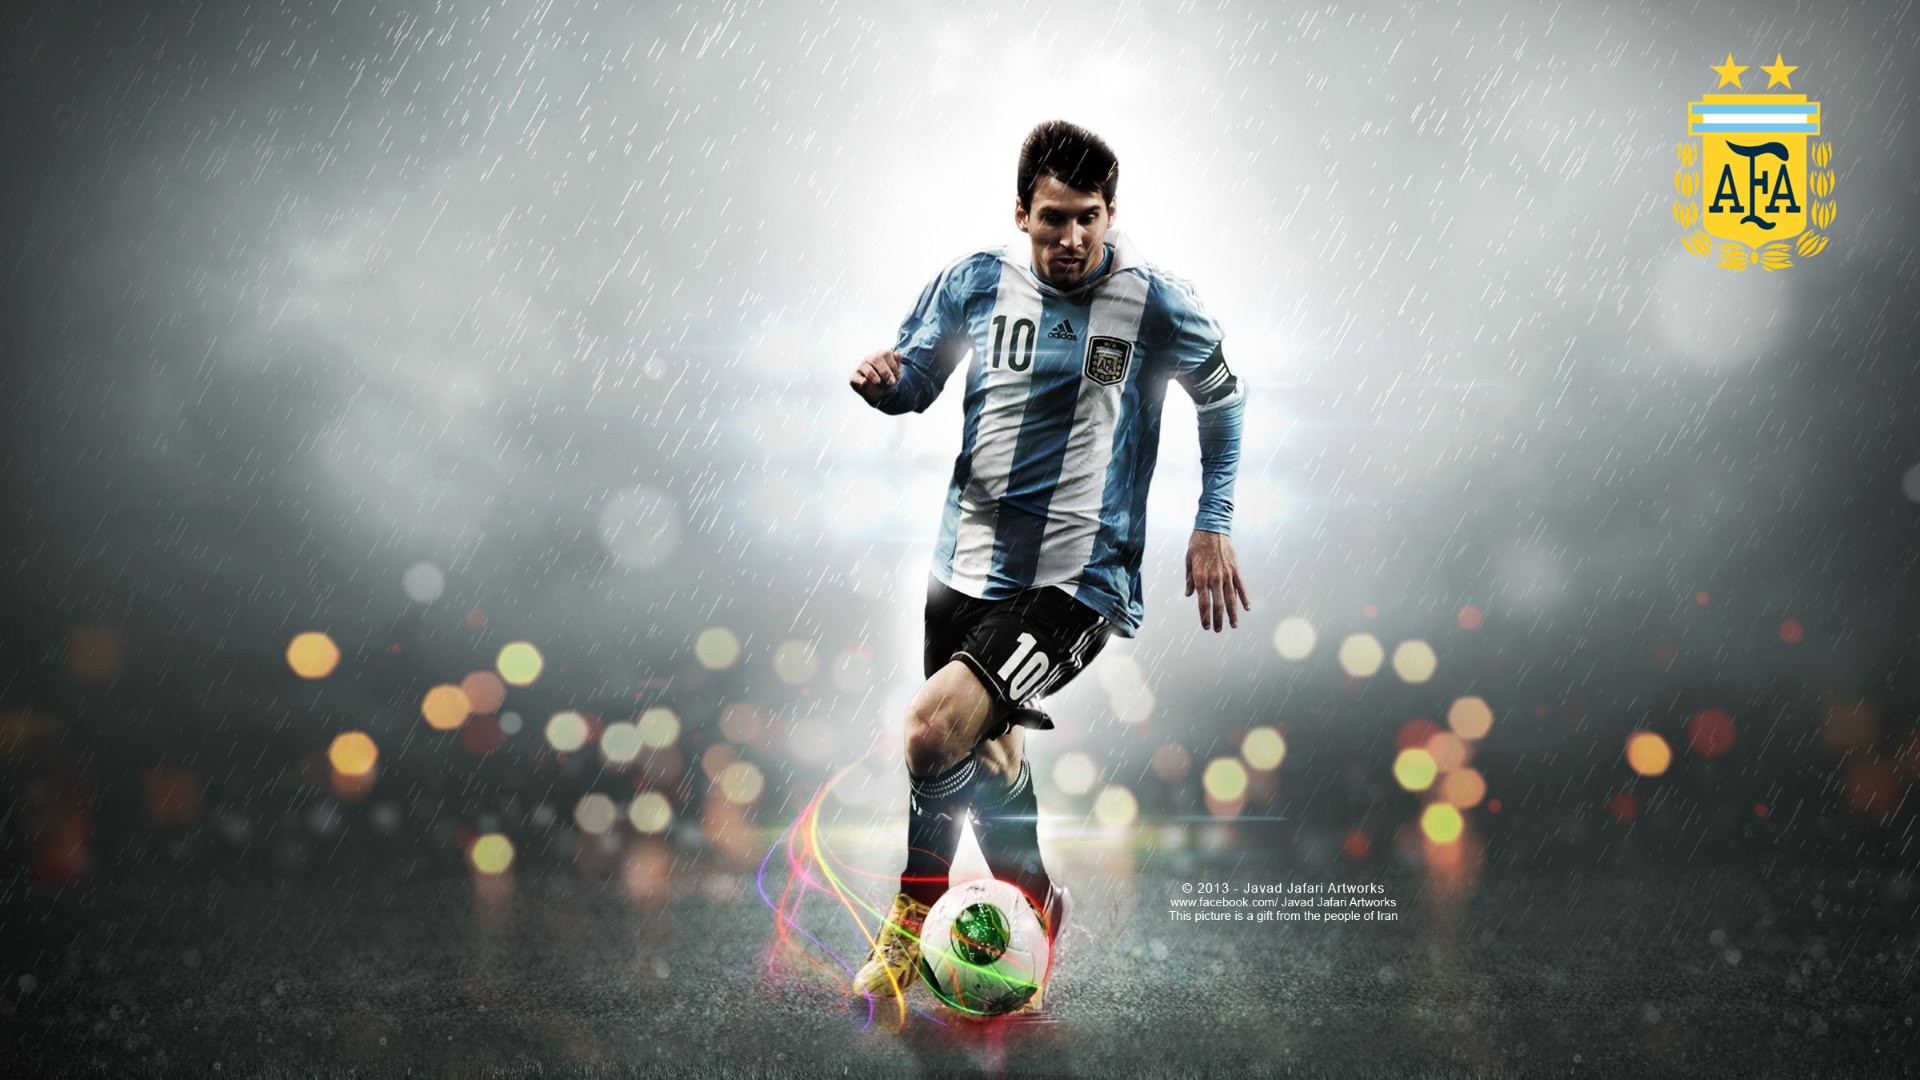 Wallpapers Messi Argentina With Resolution 1920X1080 pixel. You can make this wallpaper for your Mac or Windows Desktop Background, iPhone, Android or Tablet and another Smartphone device for free